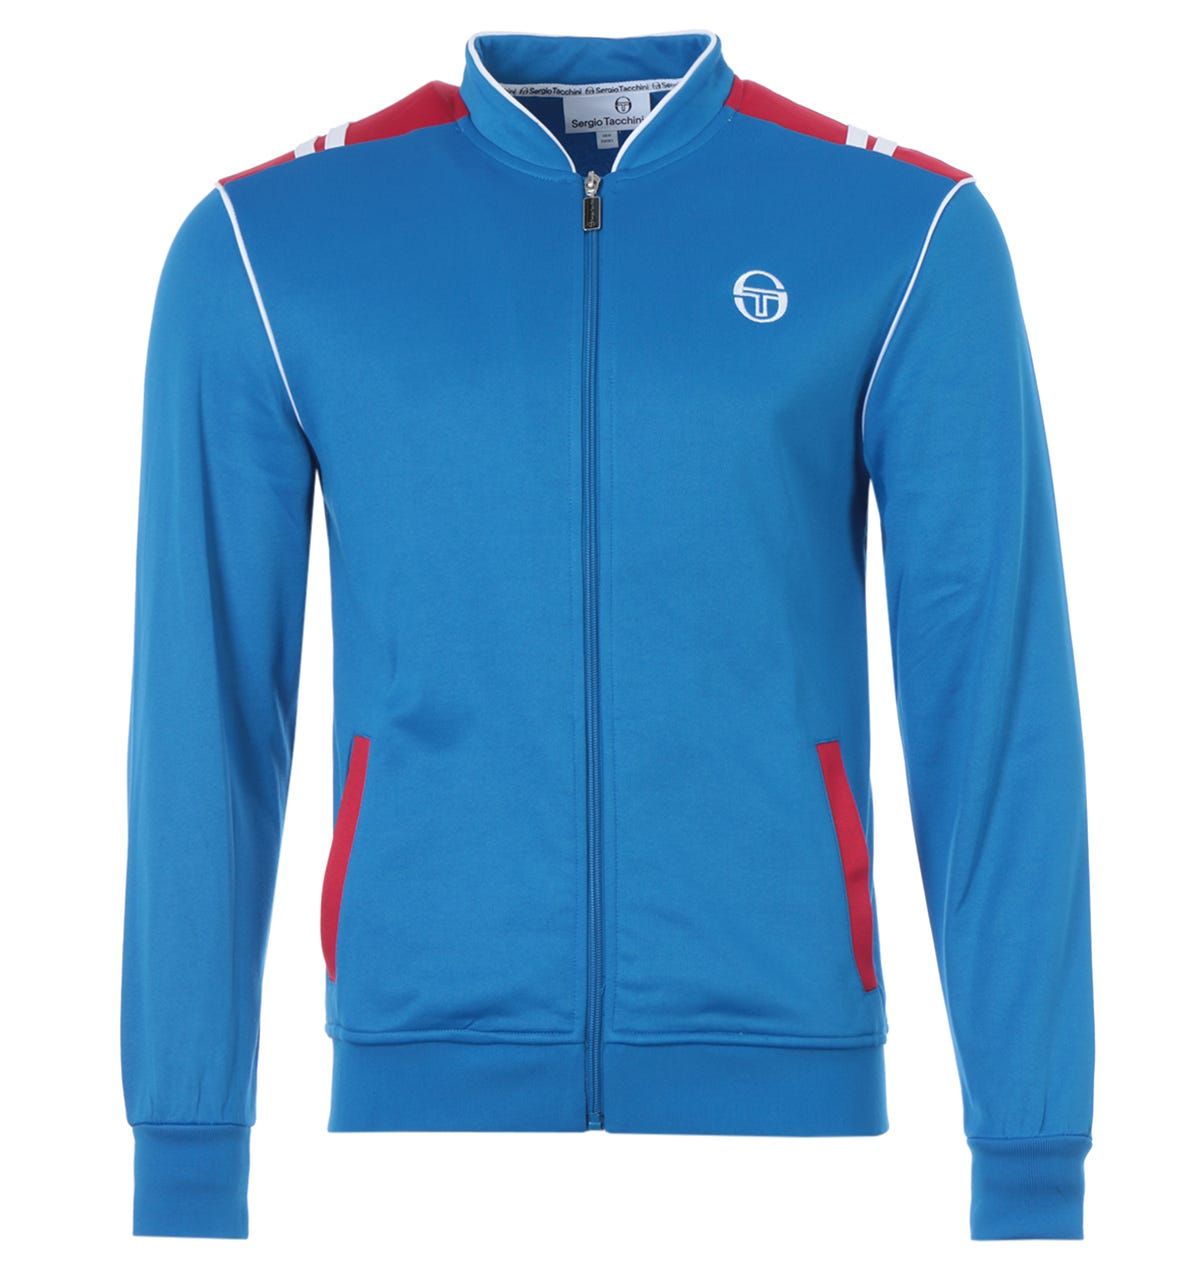 World renowned Italian sportswear brand Sergio Tacchini has been representing authenticity, craftsmanship and style since 1966, through their heritage and classic designs. The Sammy Track Top is crafted from a comfy cotton blend, featuring a stand up collar, full zip closure, twin side welt pocket, ribbed trims and sporty contrast stripes and accents. Finished with the iconic Sergio Tacchini logo embroidered at the chest. Regular Fit, Cotton Poly Blend, Stand Up Collar, Full Zip Closure, Twin Side Welt Pockets, Contrast Accents, Sergio Tacchini Branding. Style & Fit: Regular Fit, Fits True to Size. Composition & Care: 60% Polyester, 40% Cotton, Machine Wash.